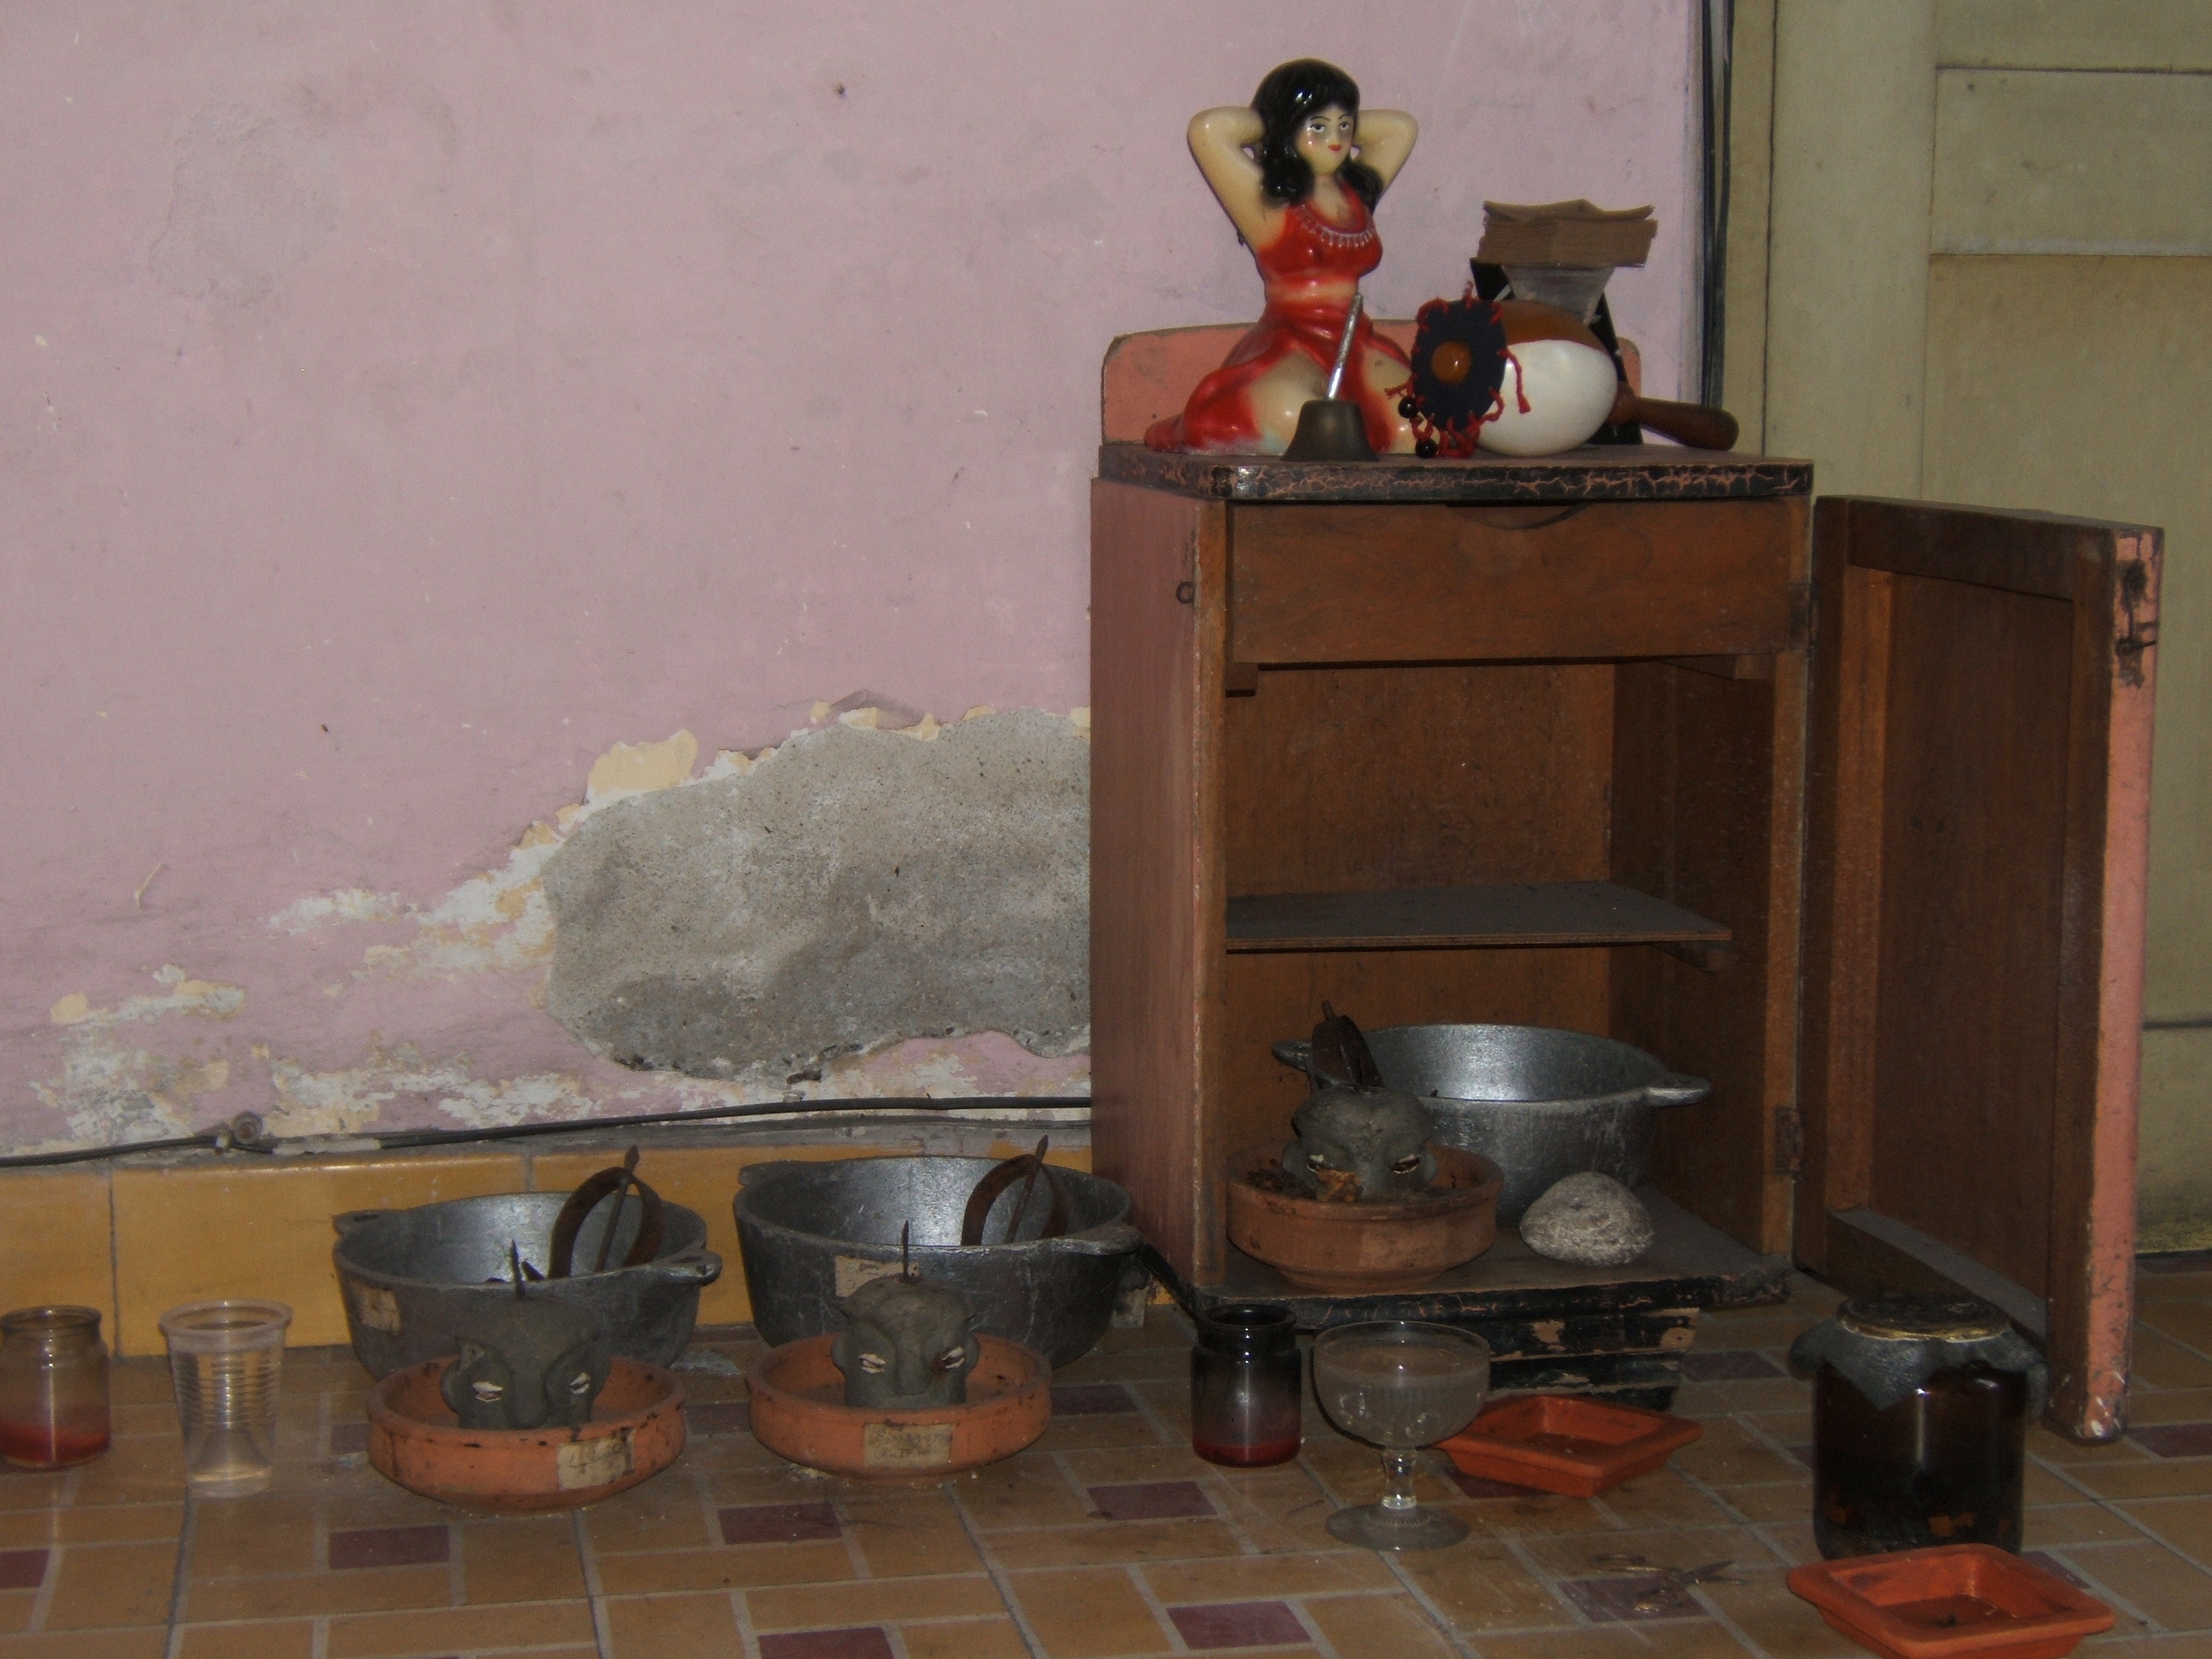 Figure 2. The oricha Eleggua’s “little house” sits next to the front door, where each household member’s Eleggua and warrior orichas can protect the house. Mirta’s “Gypsy woman” spirit is represented by the plaster statue atop the “little house.” Santiago de Cuba, August 2008. Photograph by author.